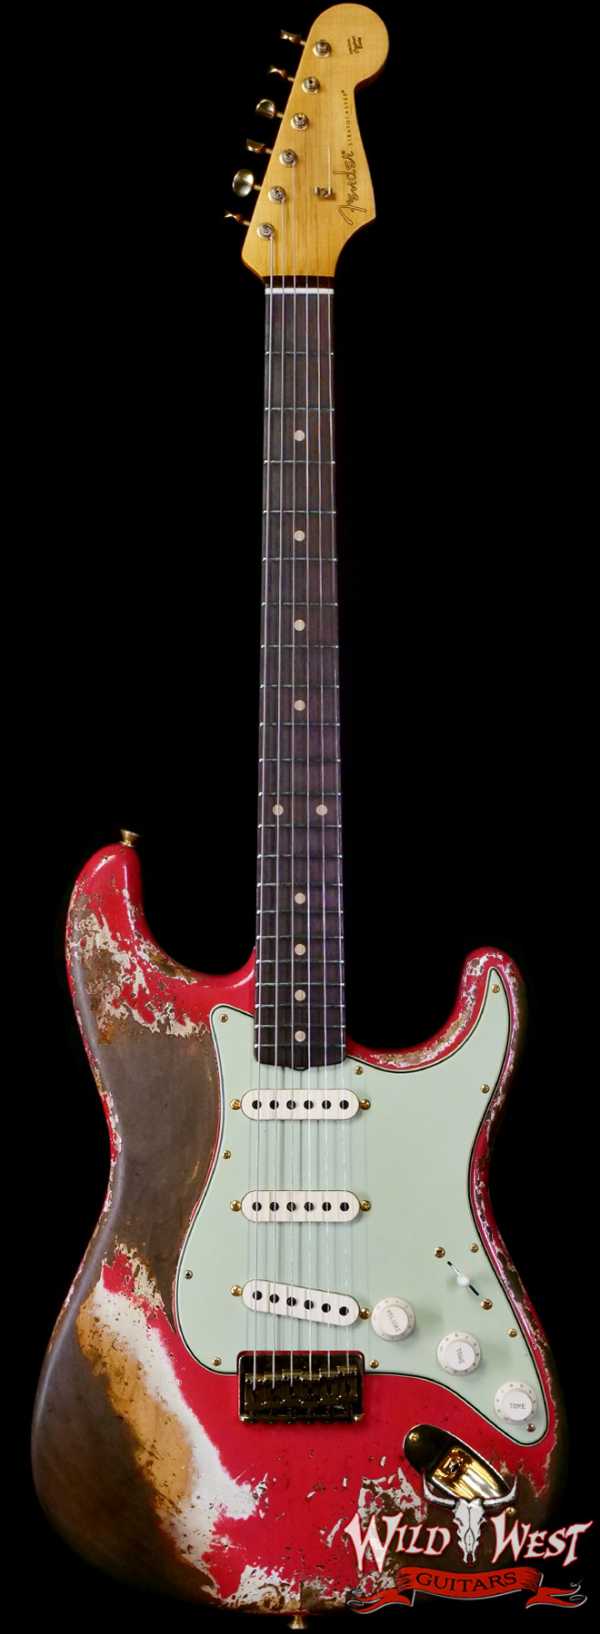 Fender Custom Shop Wild West Guitars 25th Anniversary 1960 Stratocaster Hardtail Madagascar Rosewood Fretboard Heavy Relic Fiesta Red 7.15 LBS